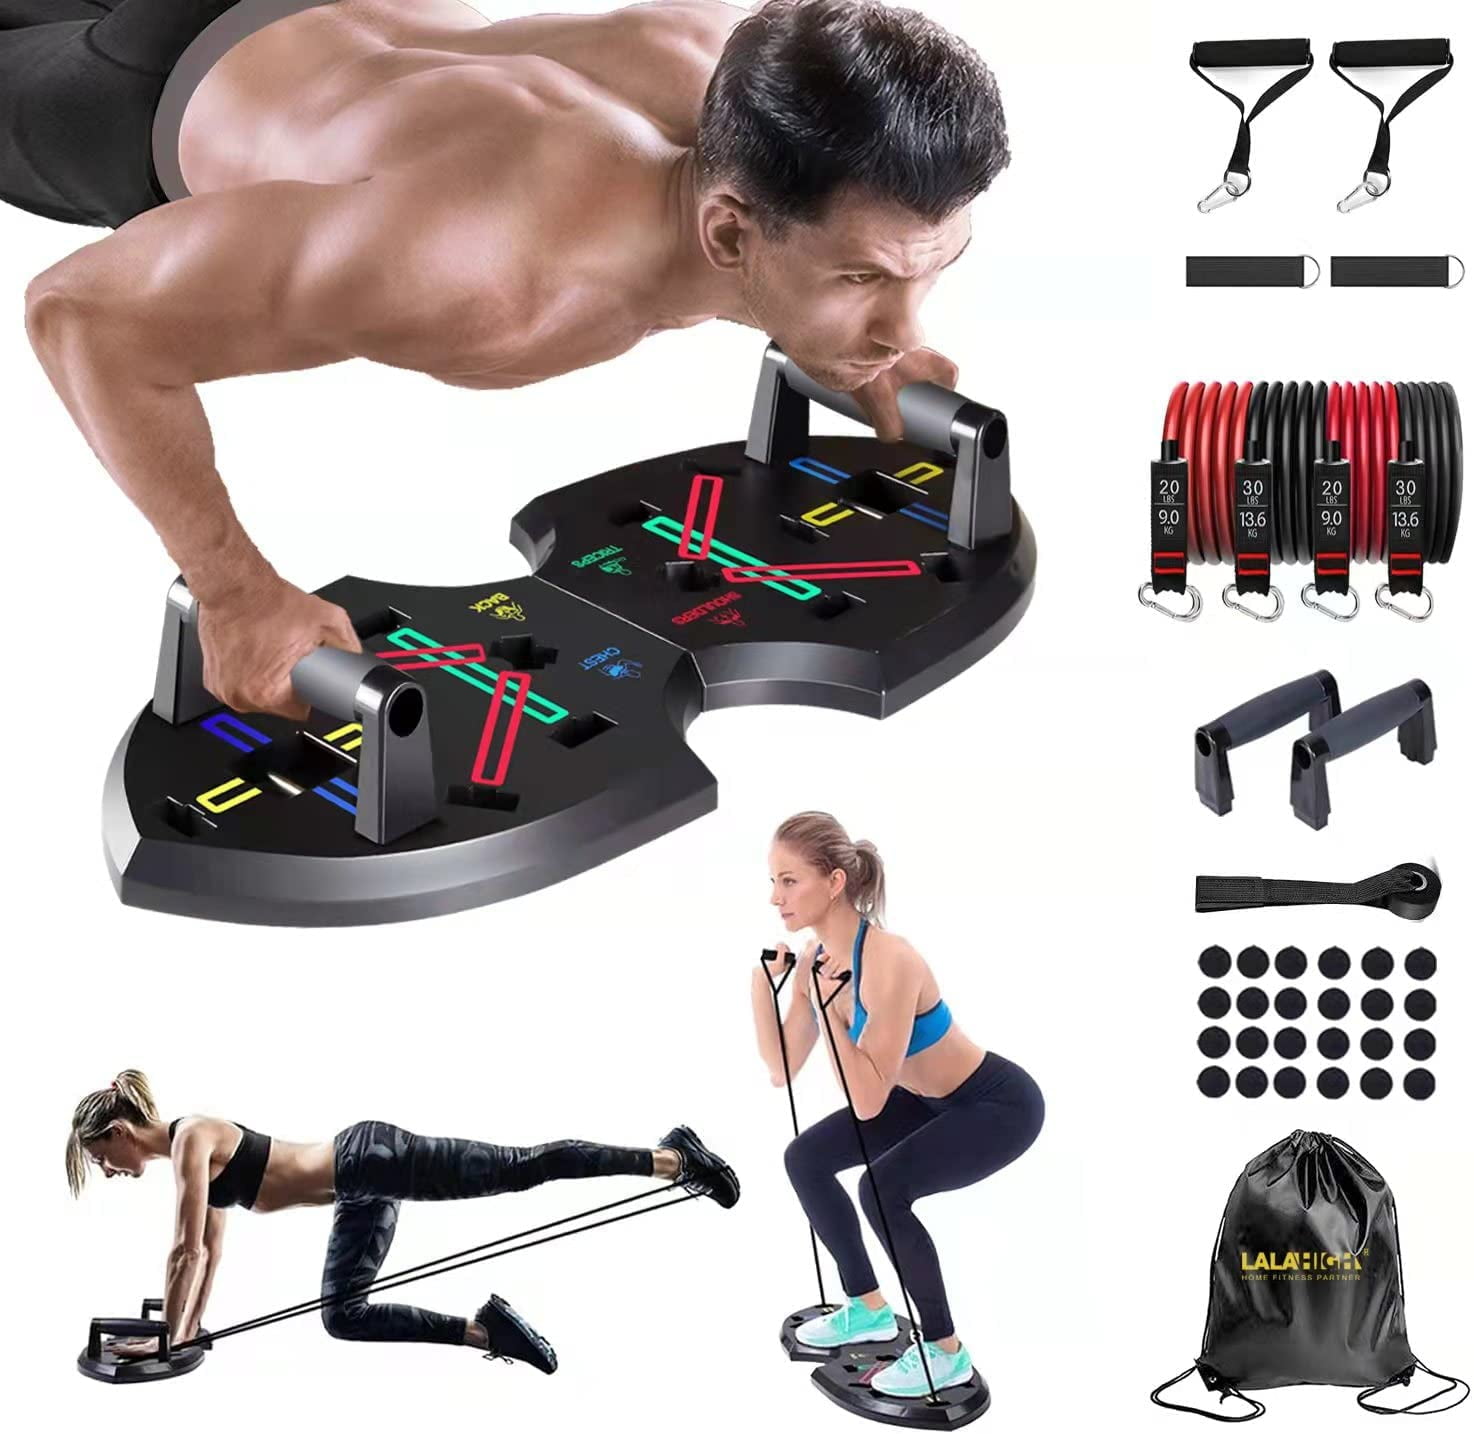 Handle Perfect Push Up Fitness Workout Exercise Durable Material Soft 